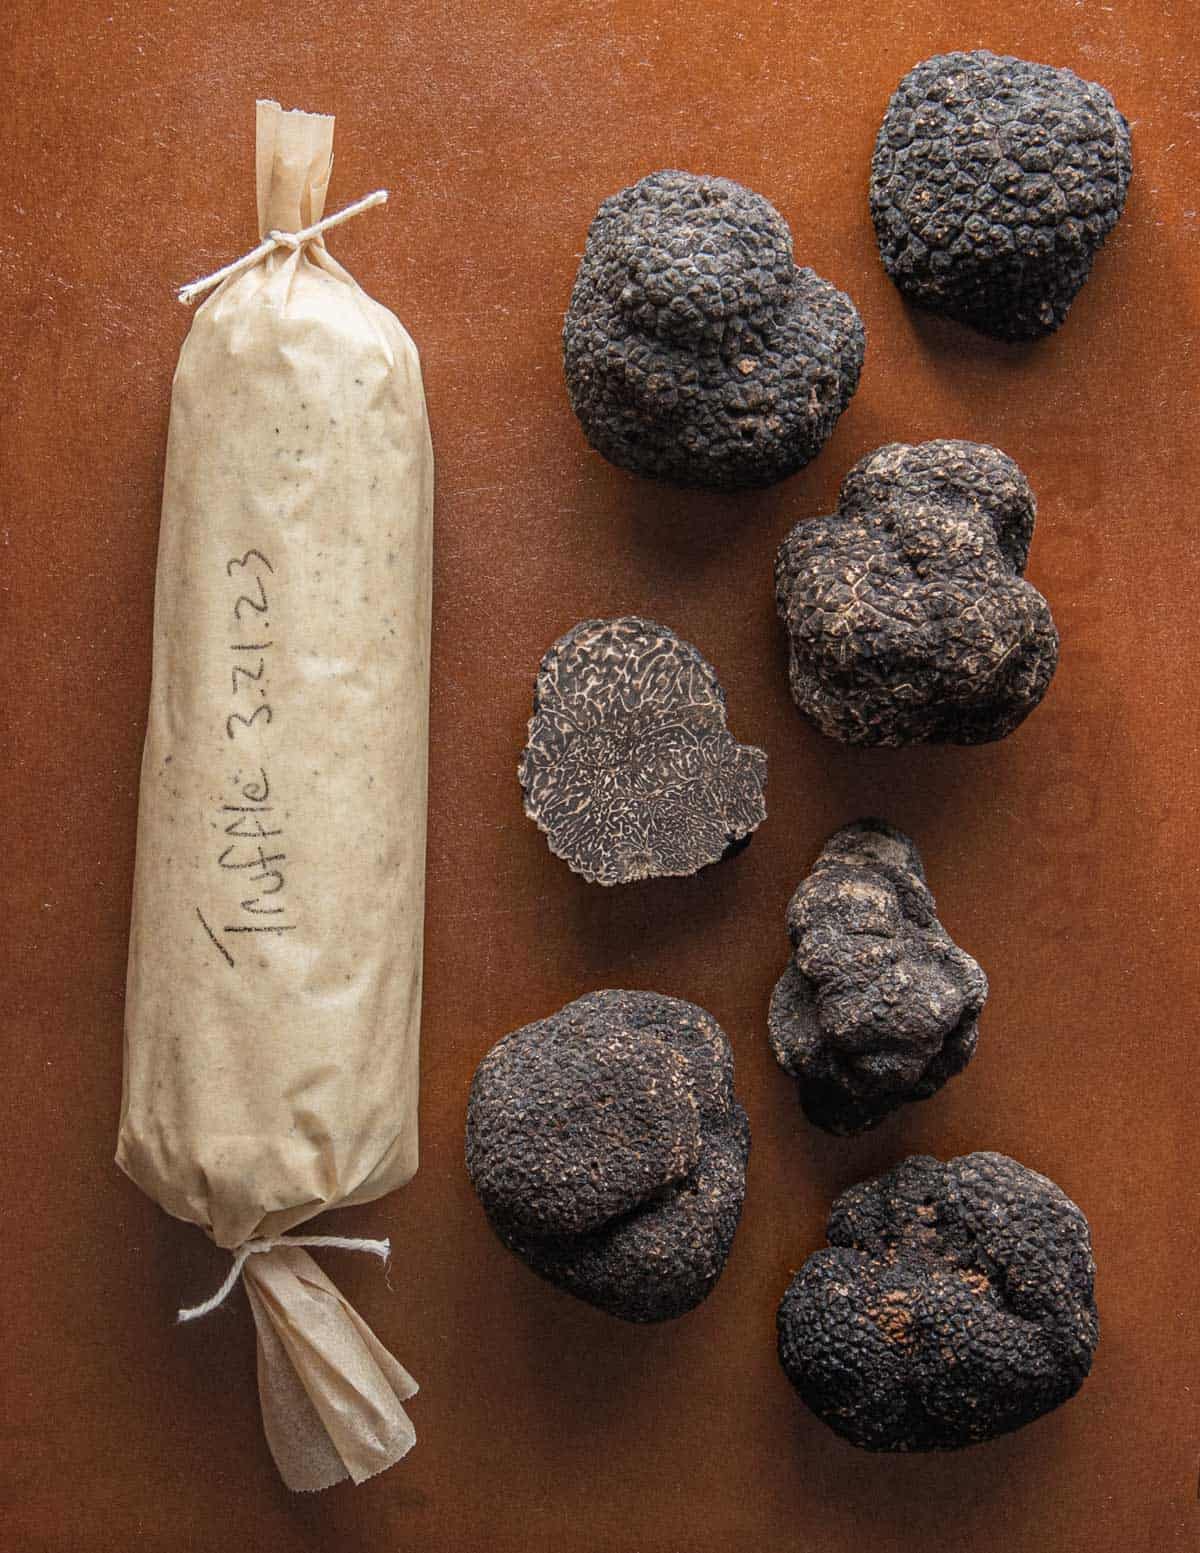 A log of black truffle butter wrapped in parchment next to many fresh black Perigord truffles. 